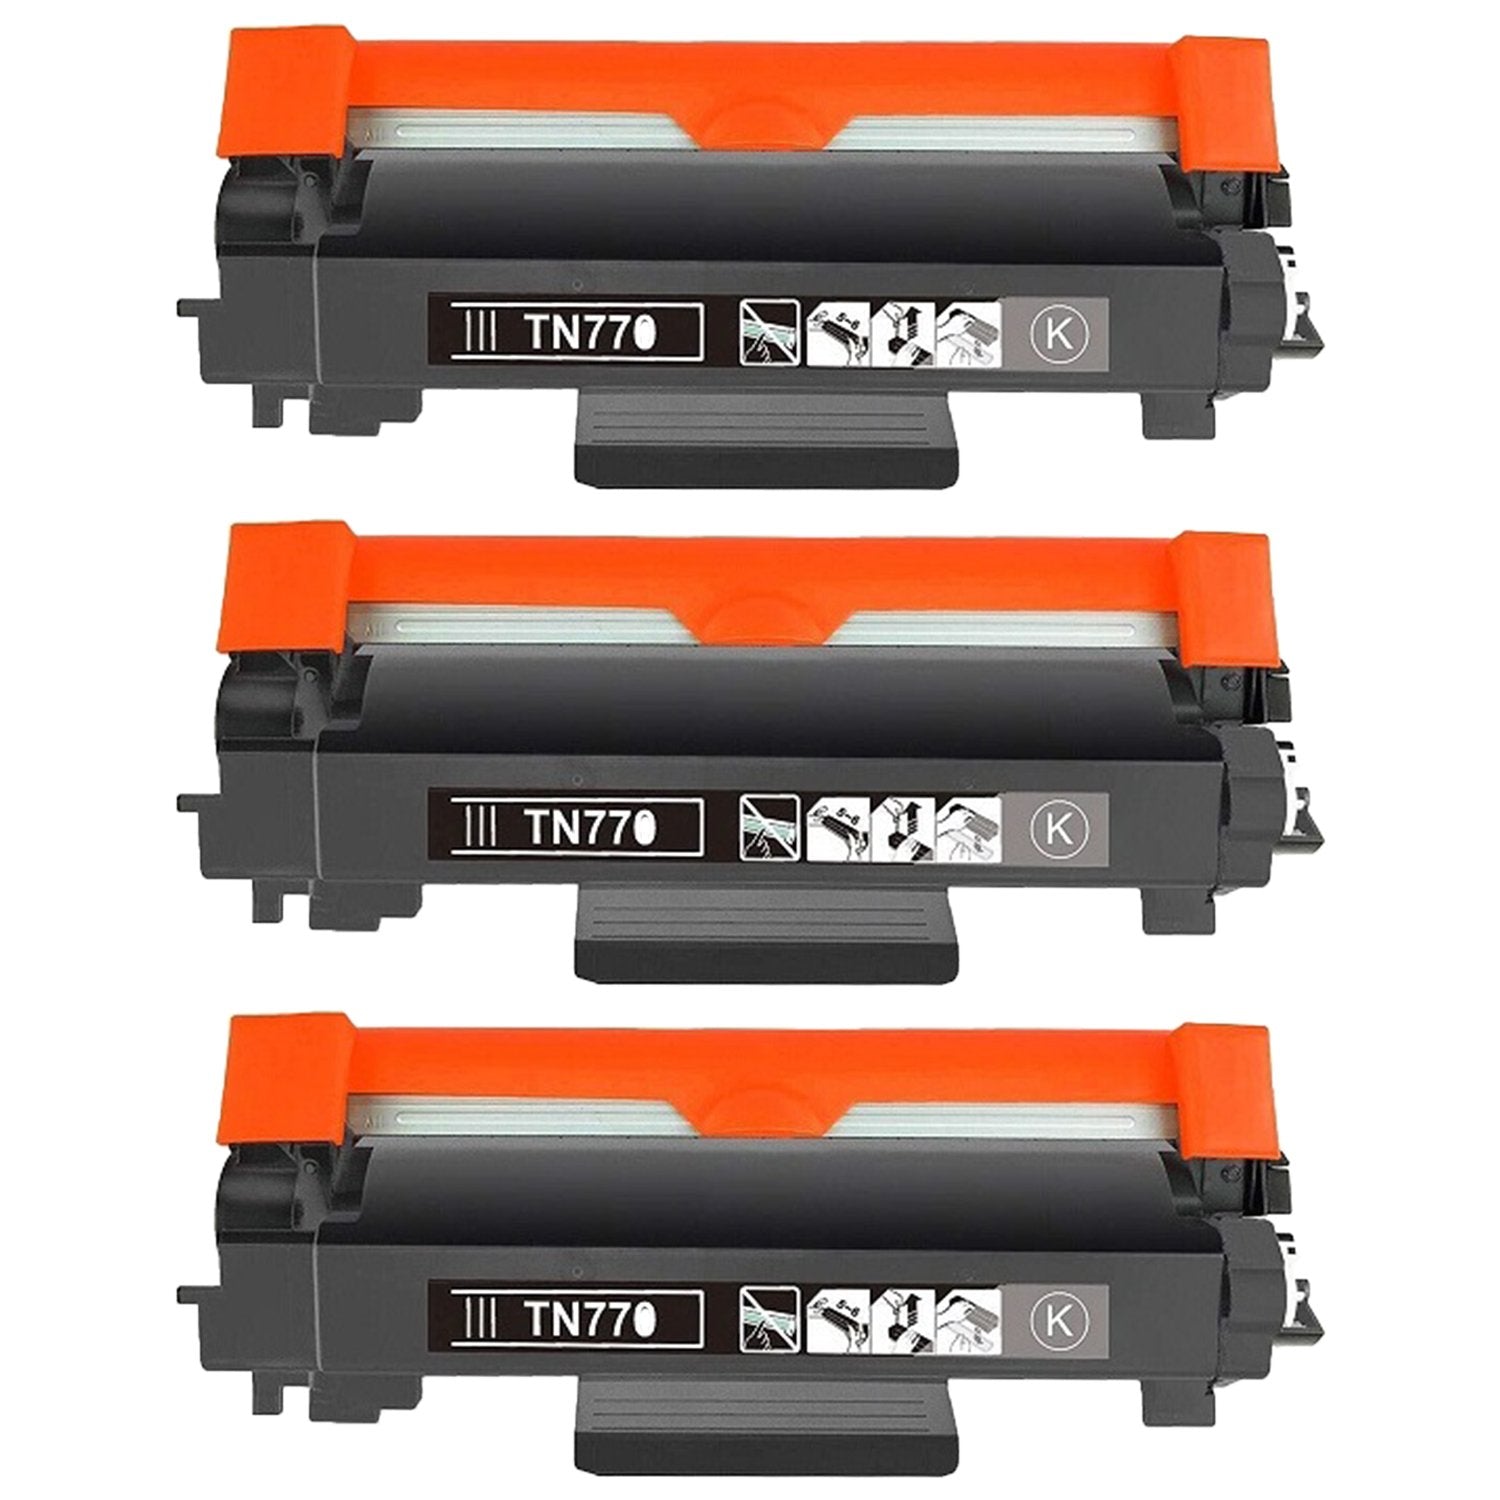 Absolute Toner Compatible Brother TN770 Black  Extra High Yield Toner Cartridge Brother Toner Cartridges